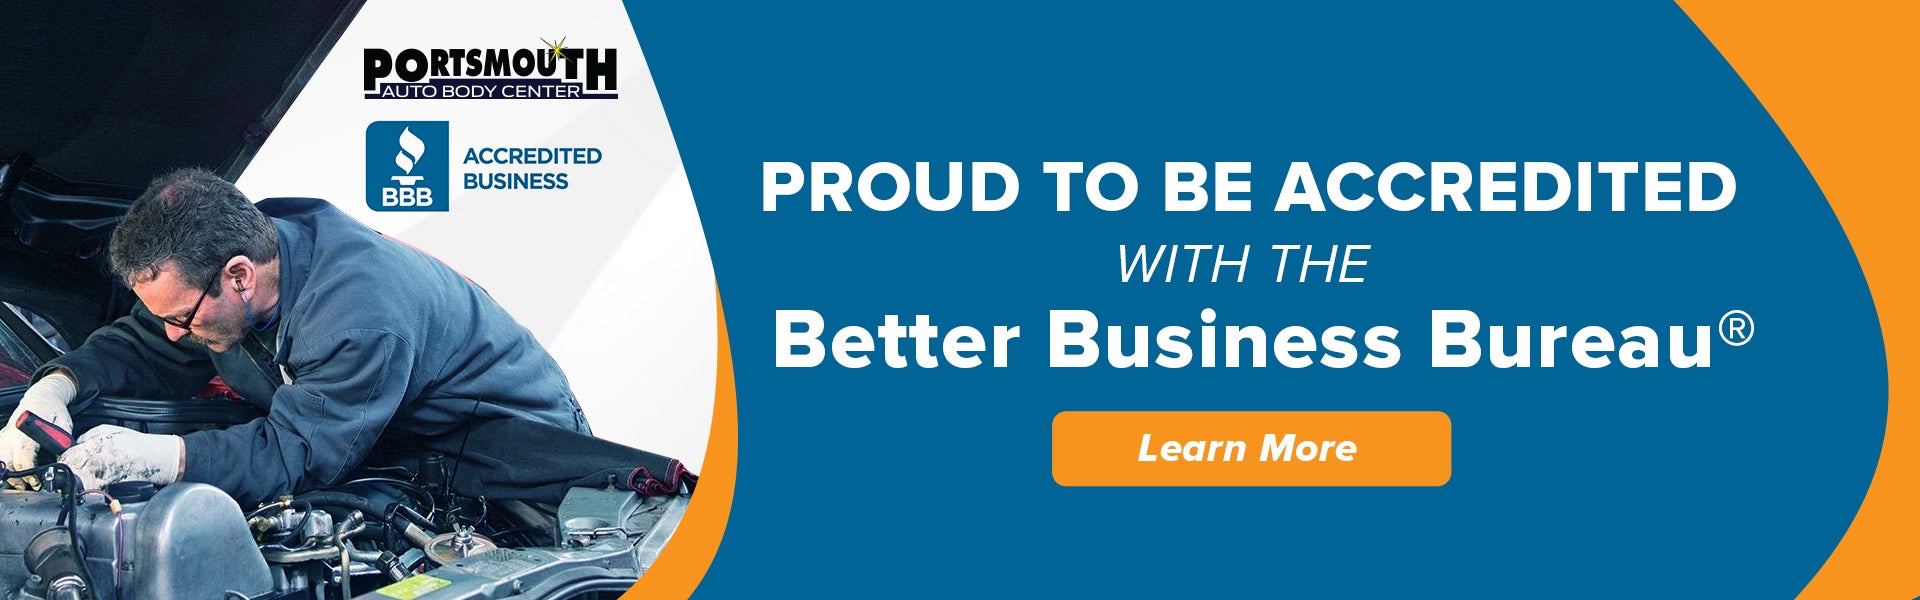 Proud to be accredited with the Better Business Bureau